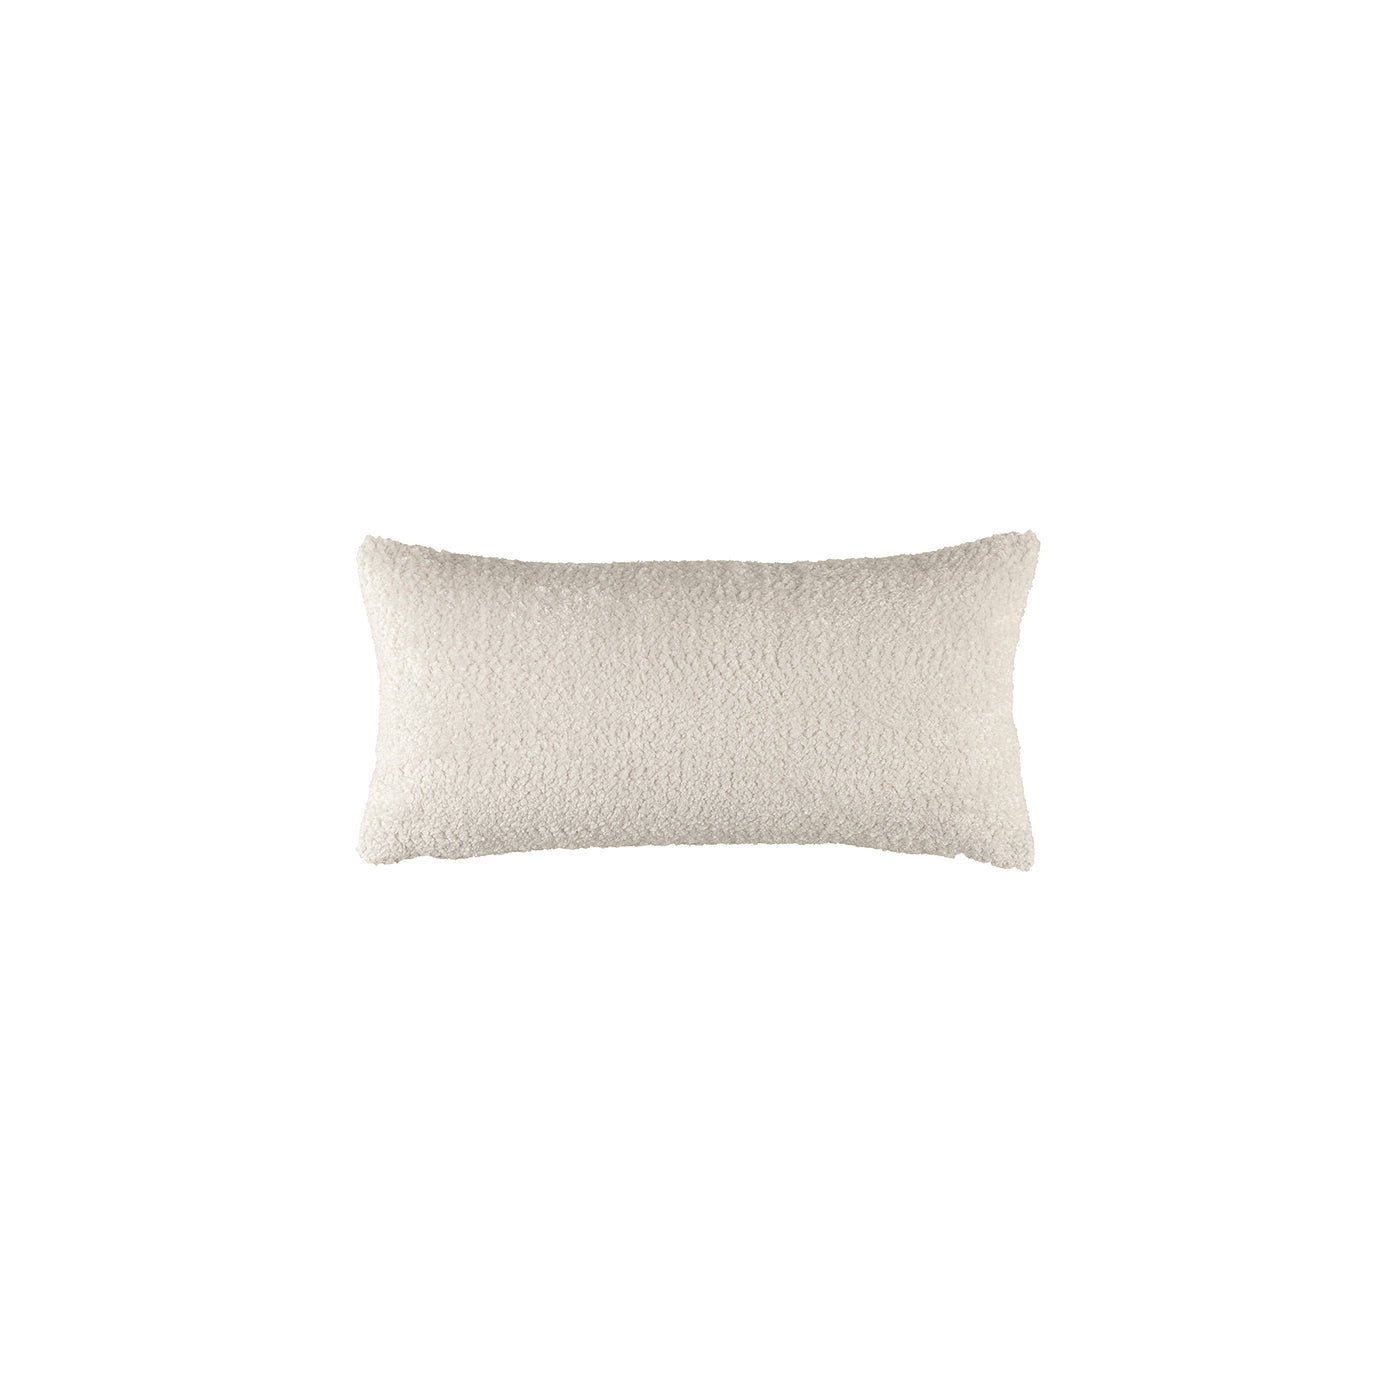 Zoey Oyster Small Rectangle Pillow (12x24)